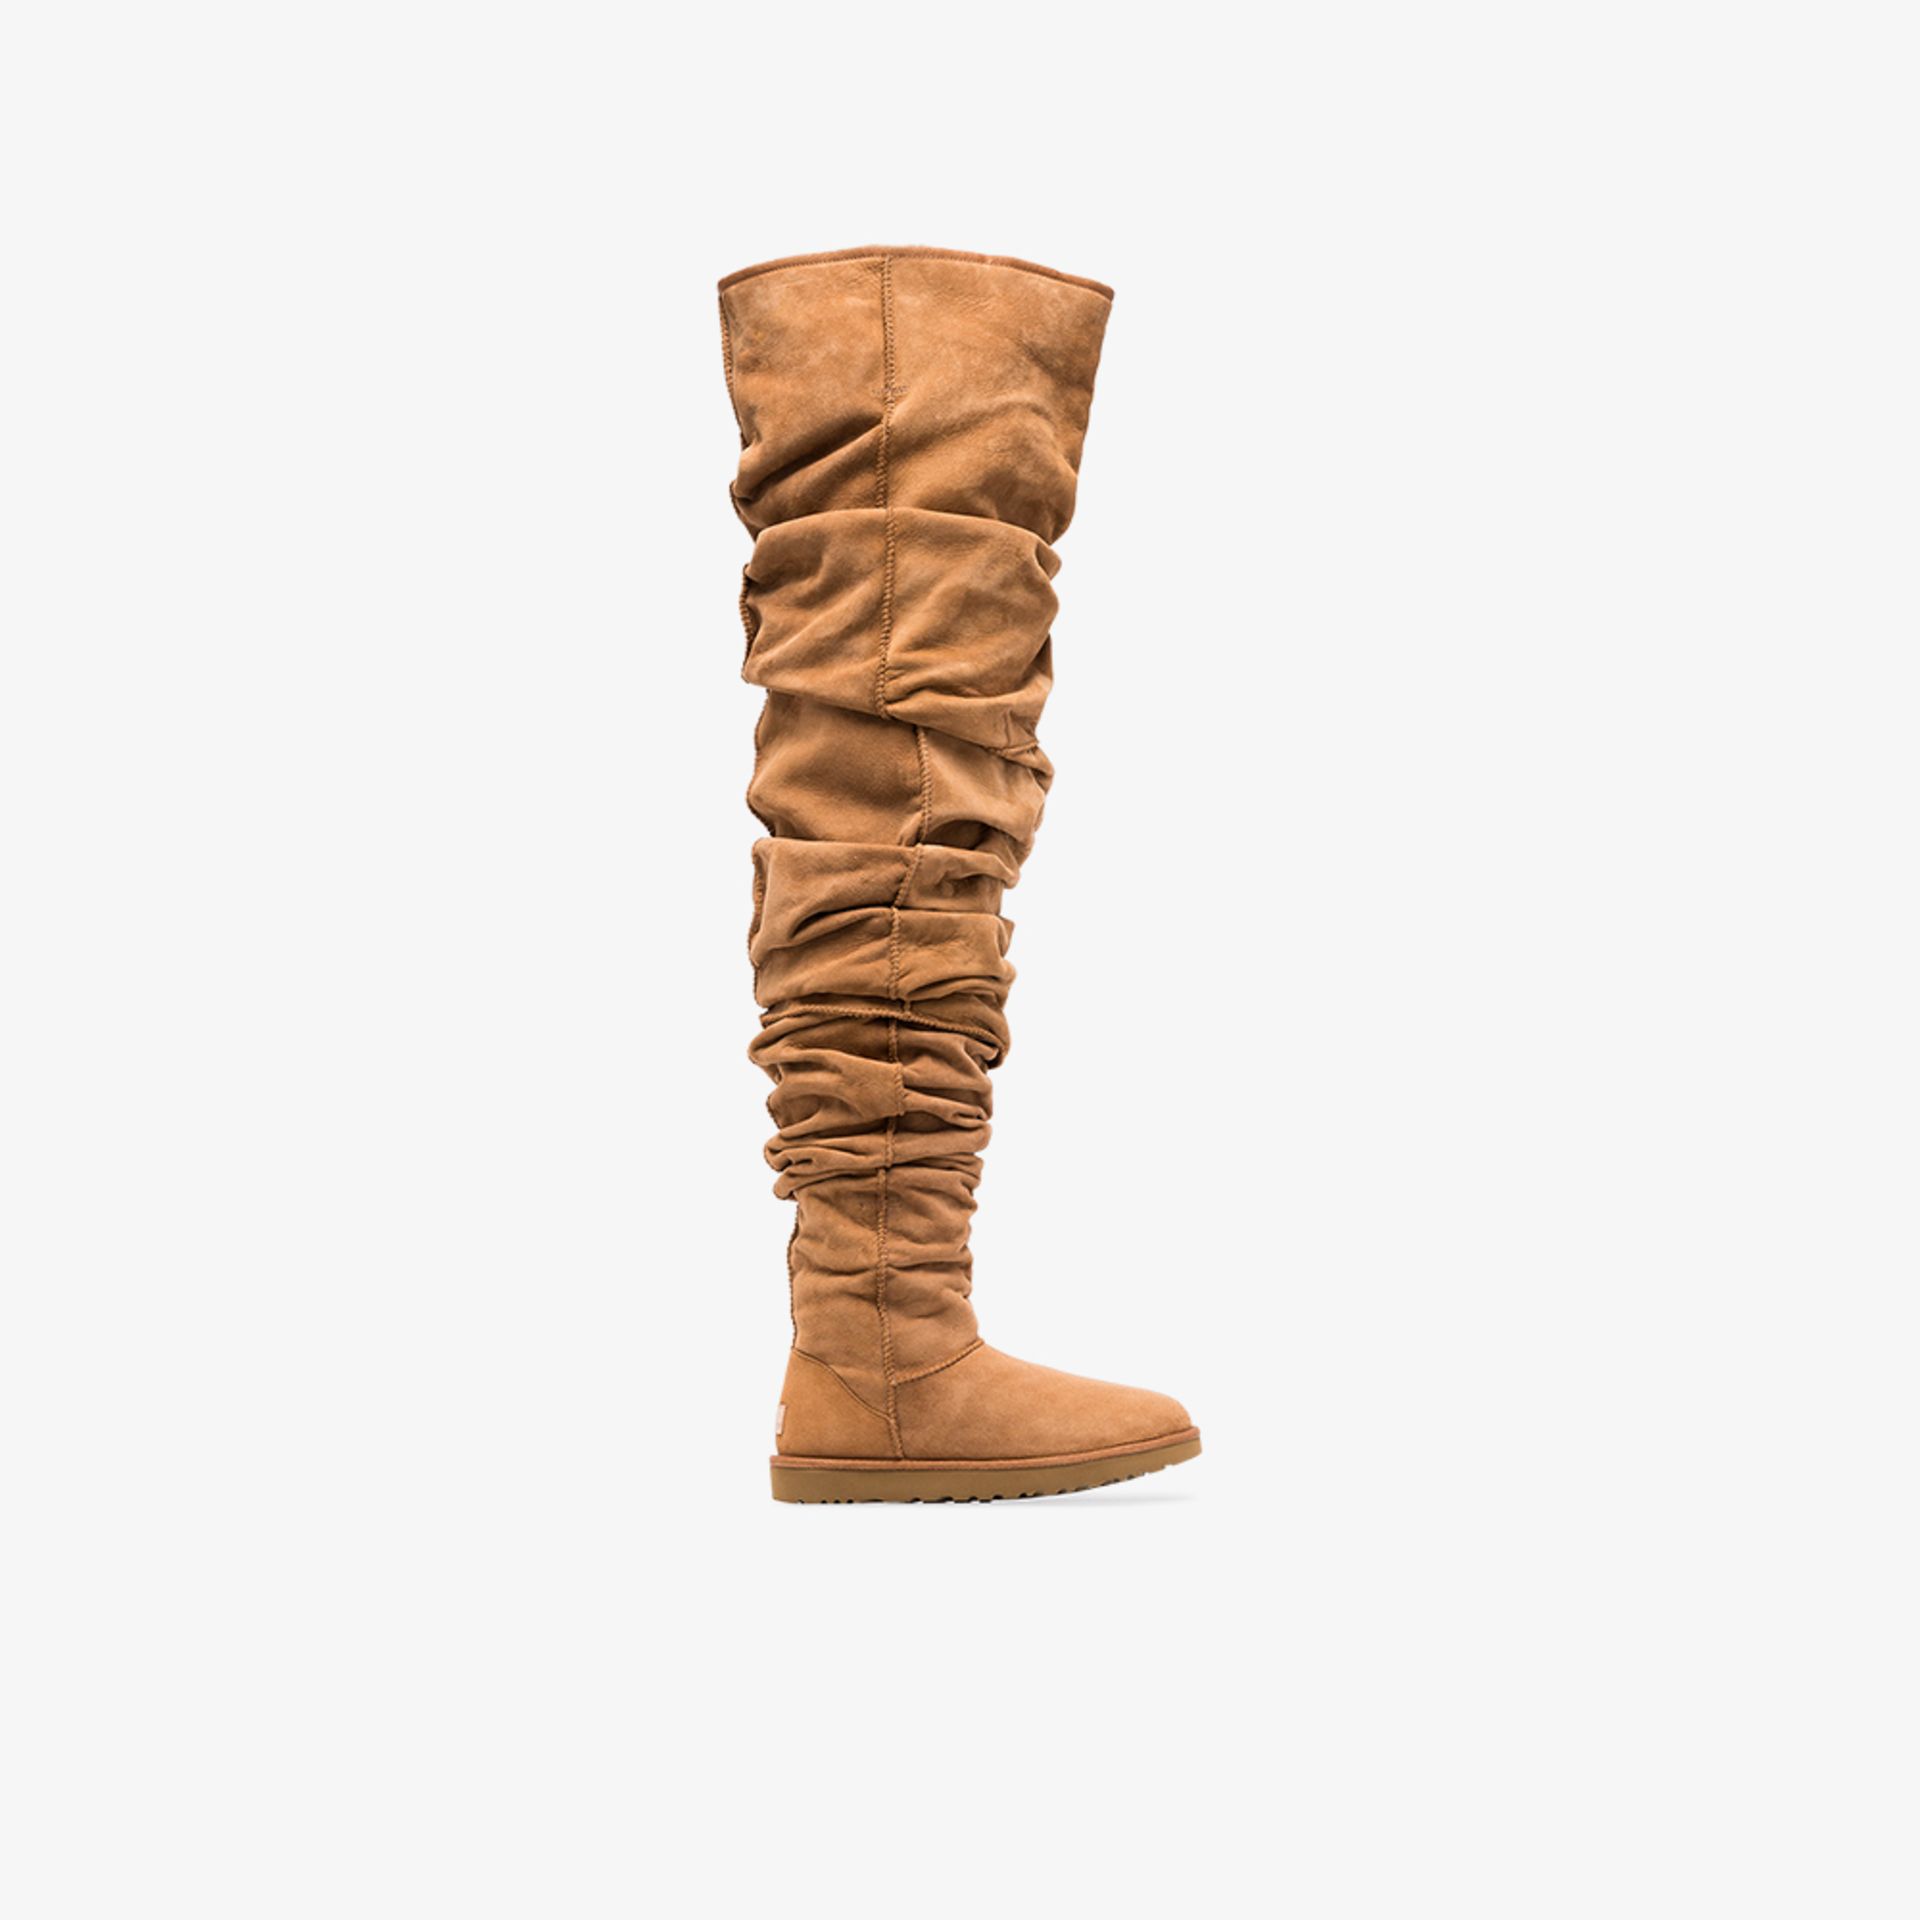 ugg slouch boots